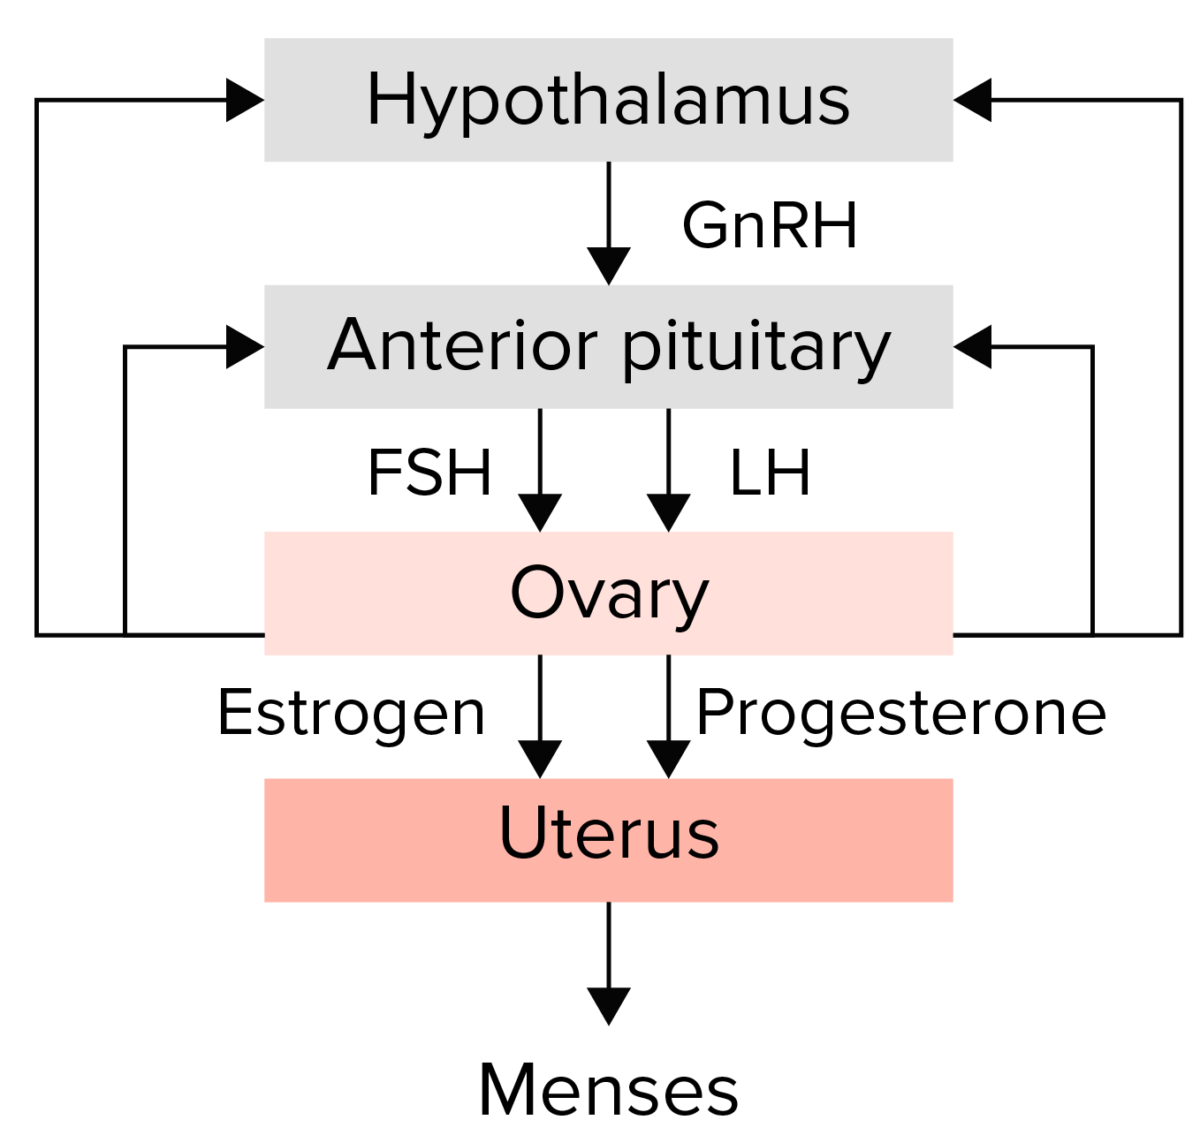 Summary of the hypothalamic–pituitary–ovarian axis